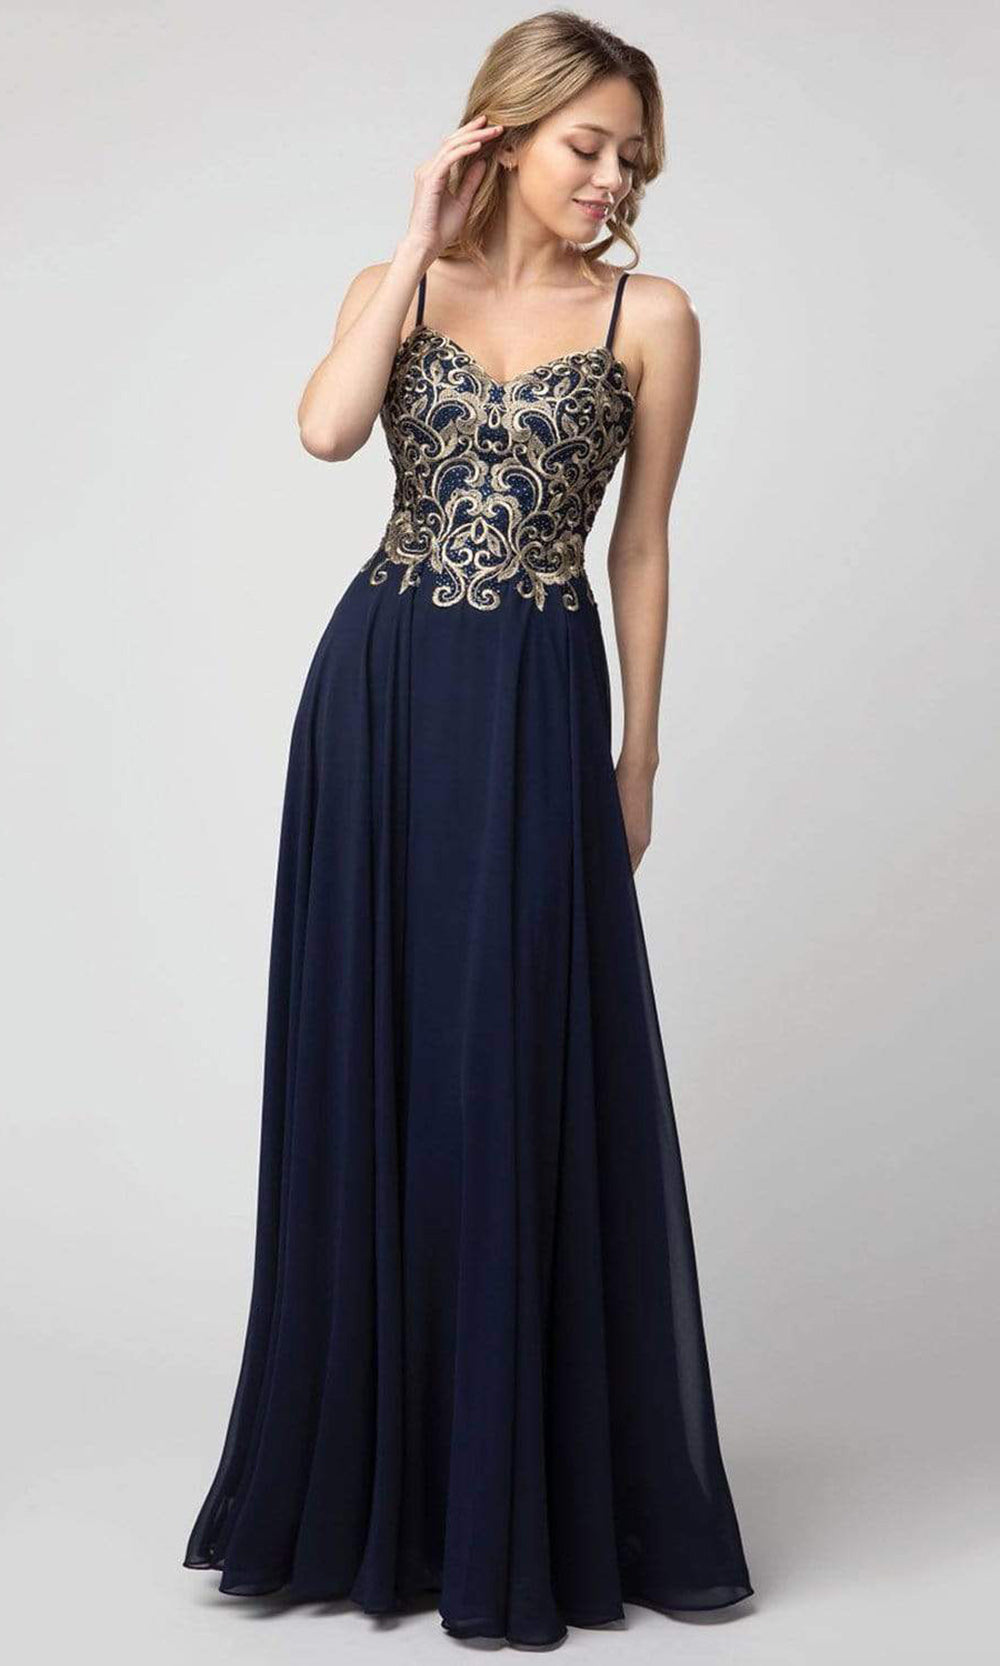 Shail K - Sweetheart Gilt-Embroidered Bodice Dress In Blue